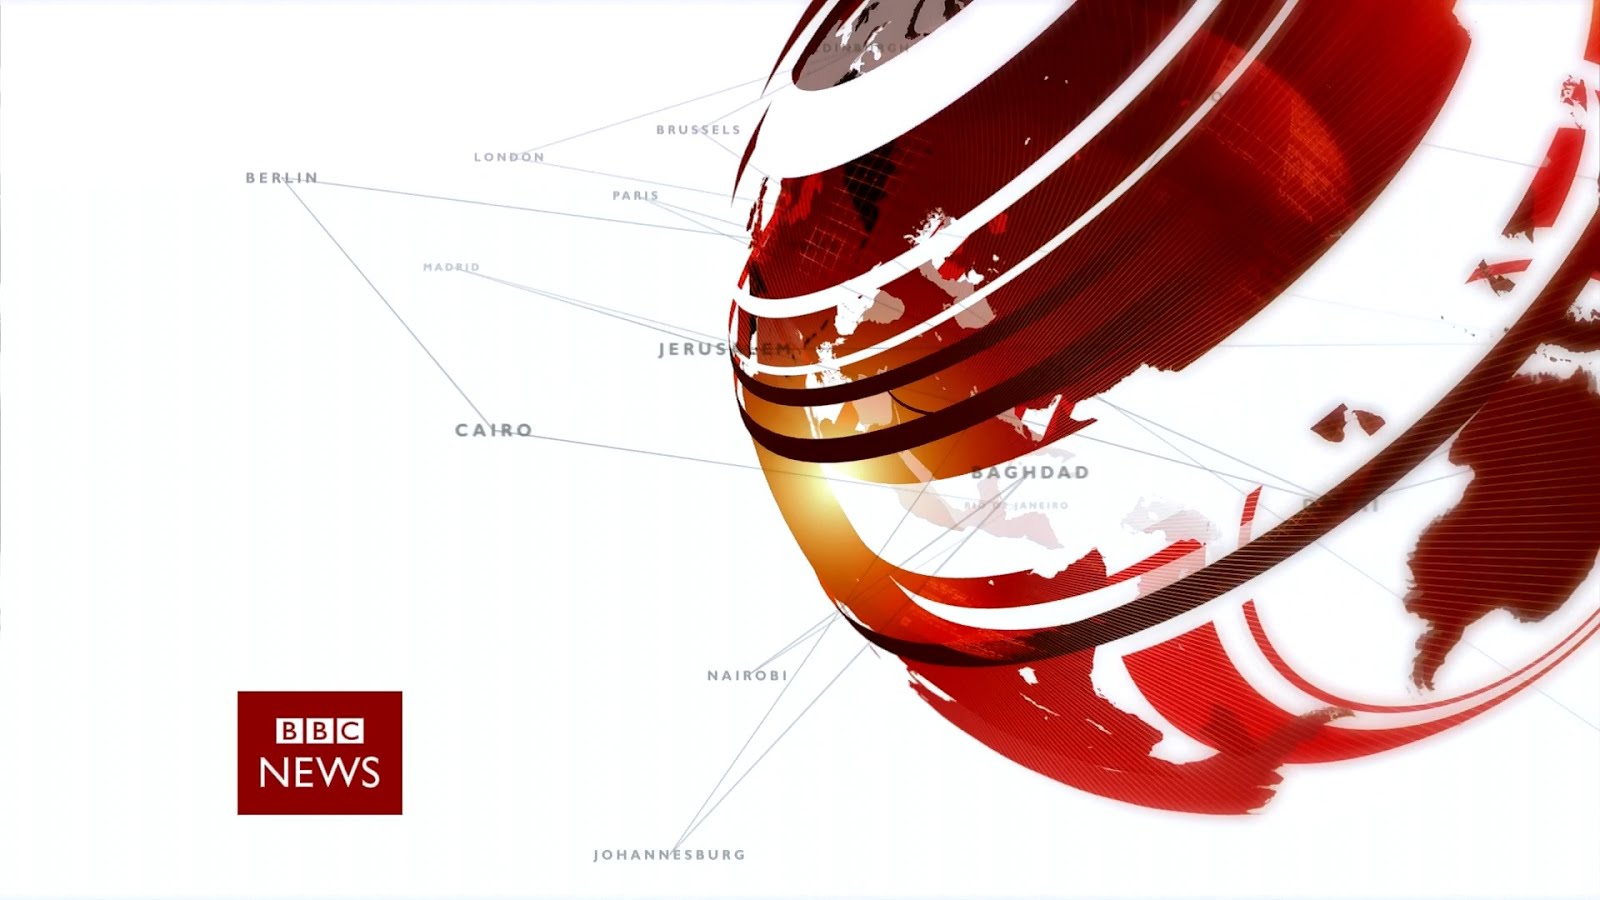 BBC & Al Jazeera: Two Fake news outlets protect a dying regime in Ethiopia while attacking Eritrea